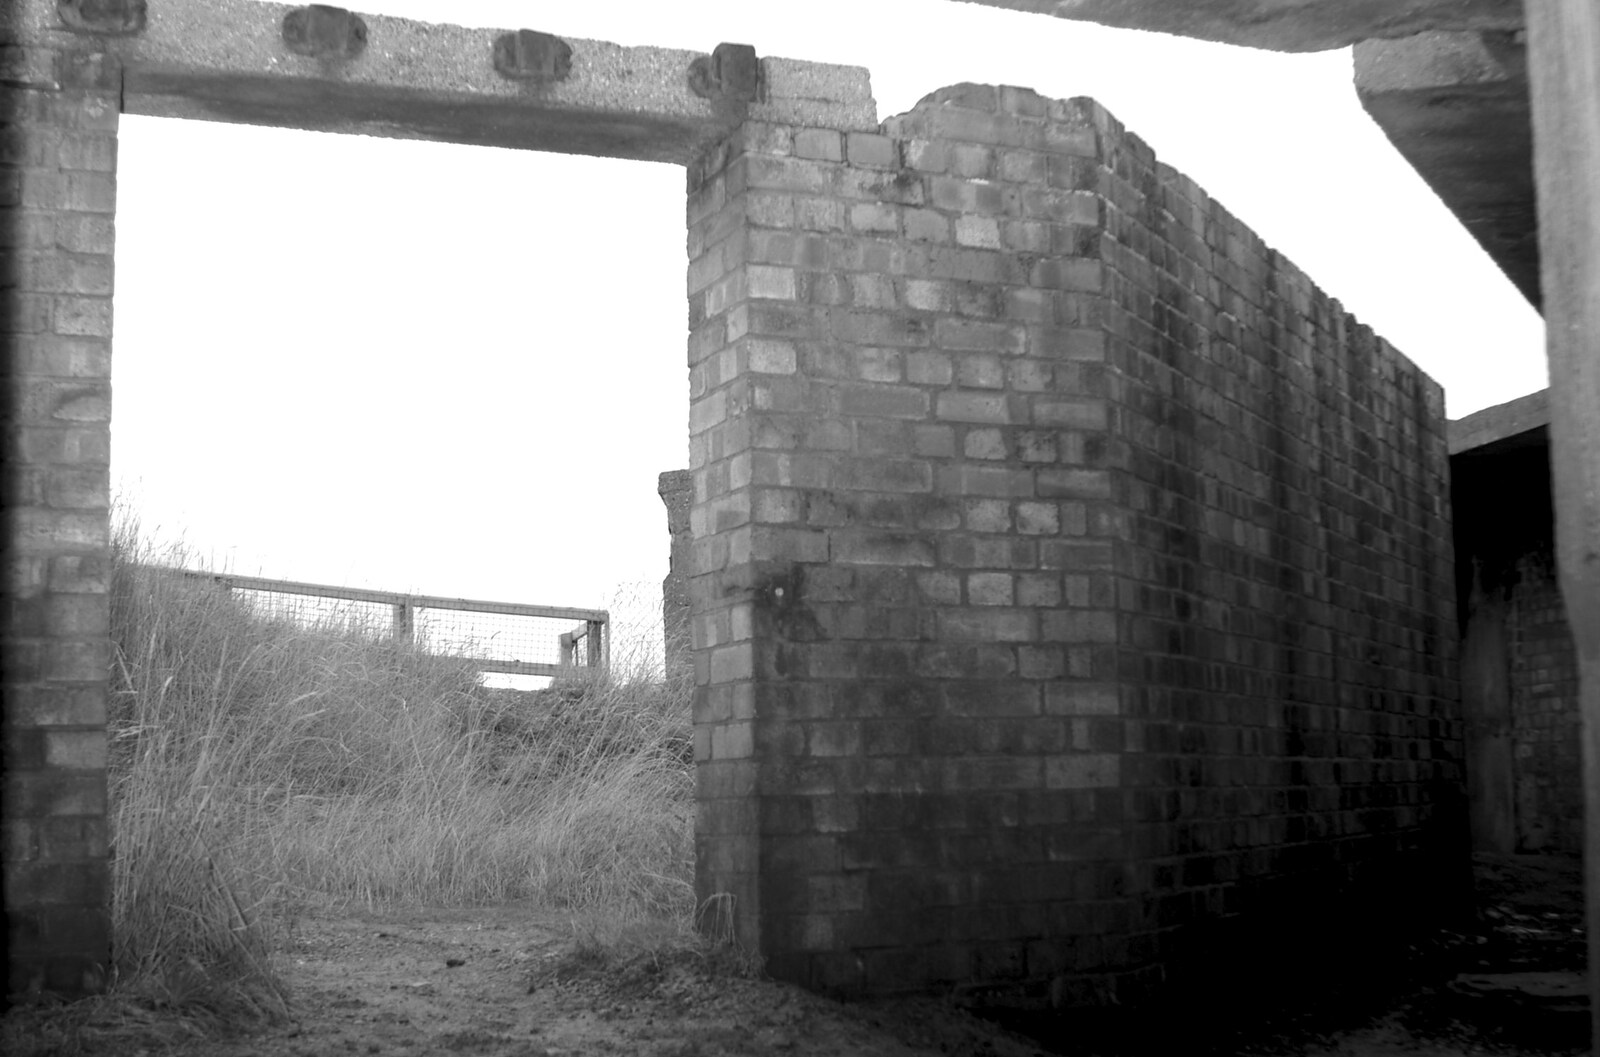 A derelict brick wall from A Trip to East Lane, Bawdsey, Suffolk - 28th November 2004